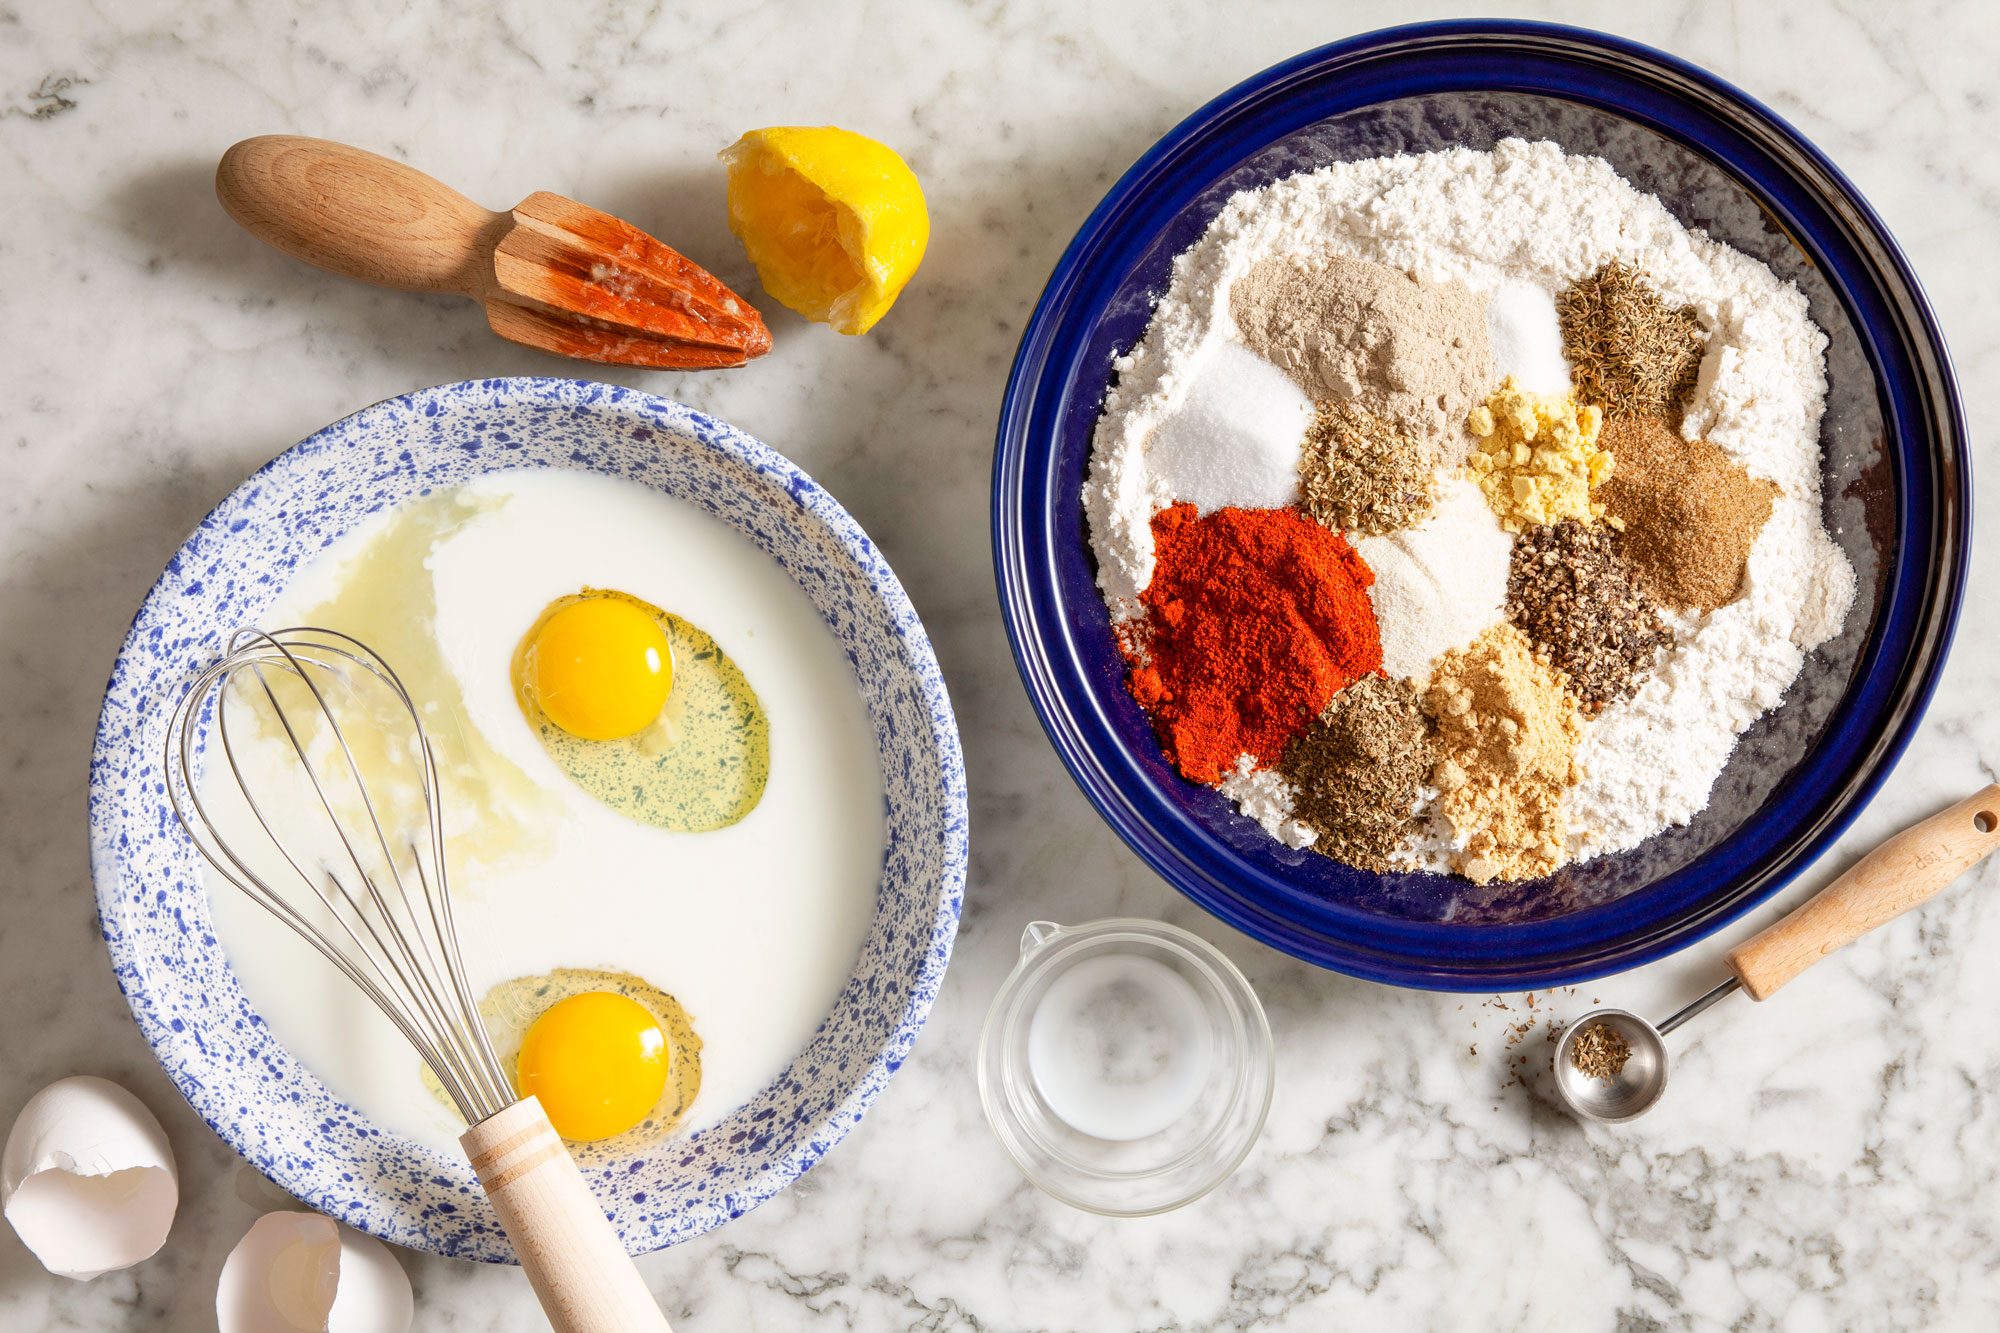 Mix of Chicken Coating Dry Ingredients in a Bowl and Milk, Egg and Lemon in Another Bowl